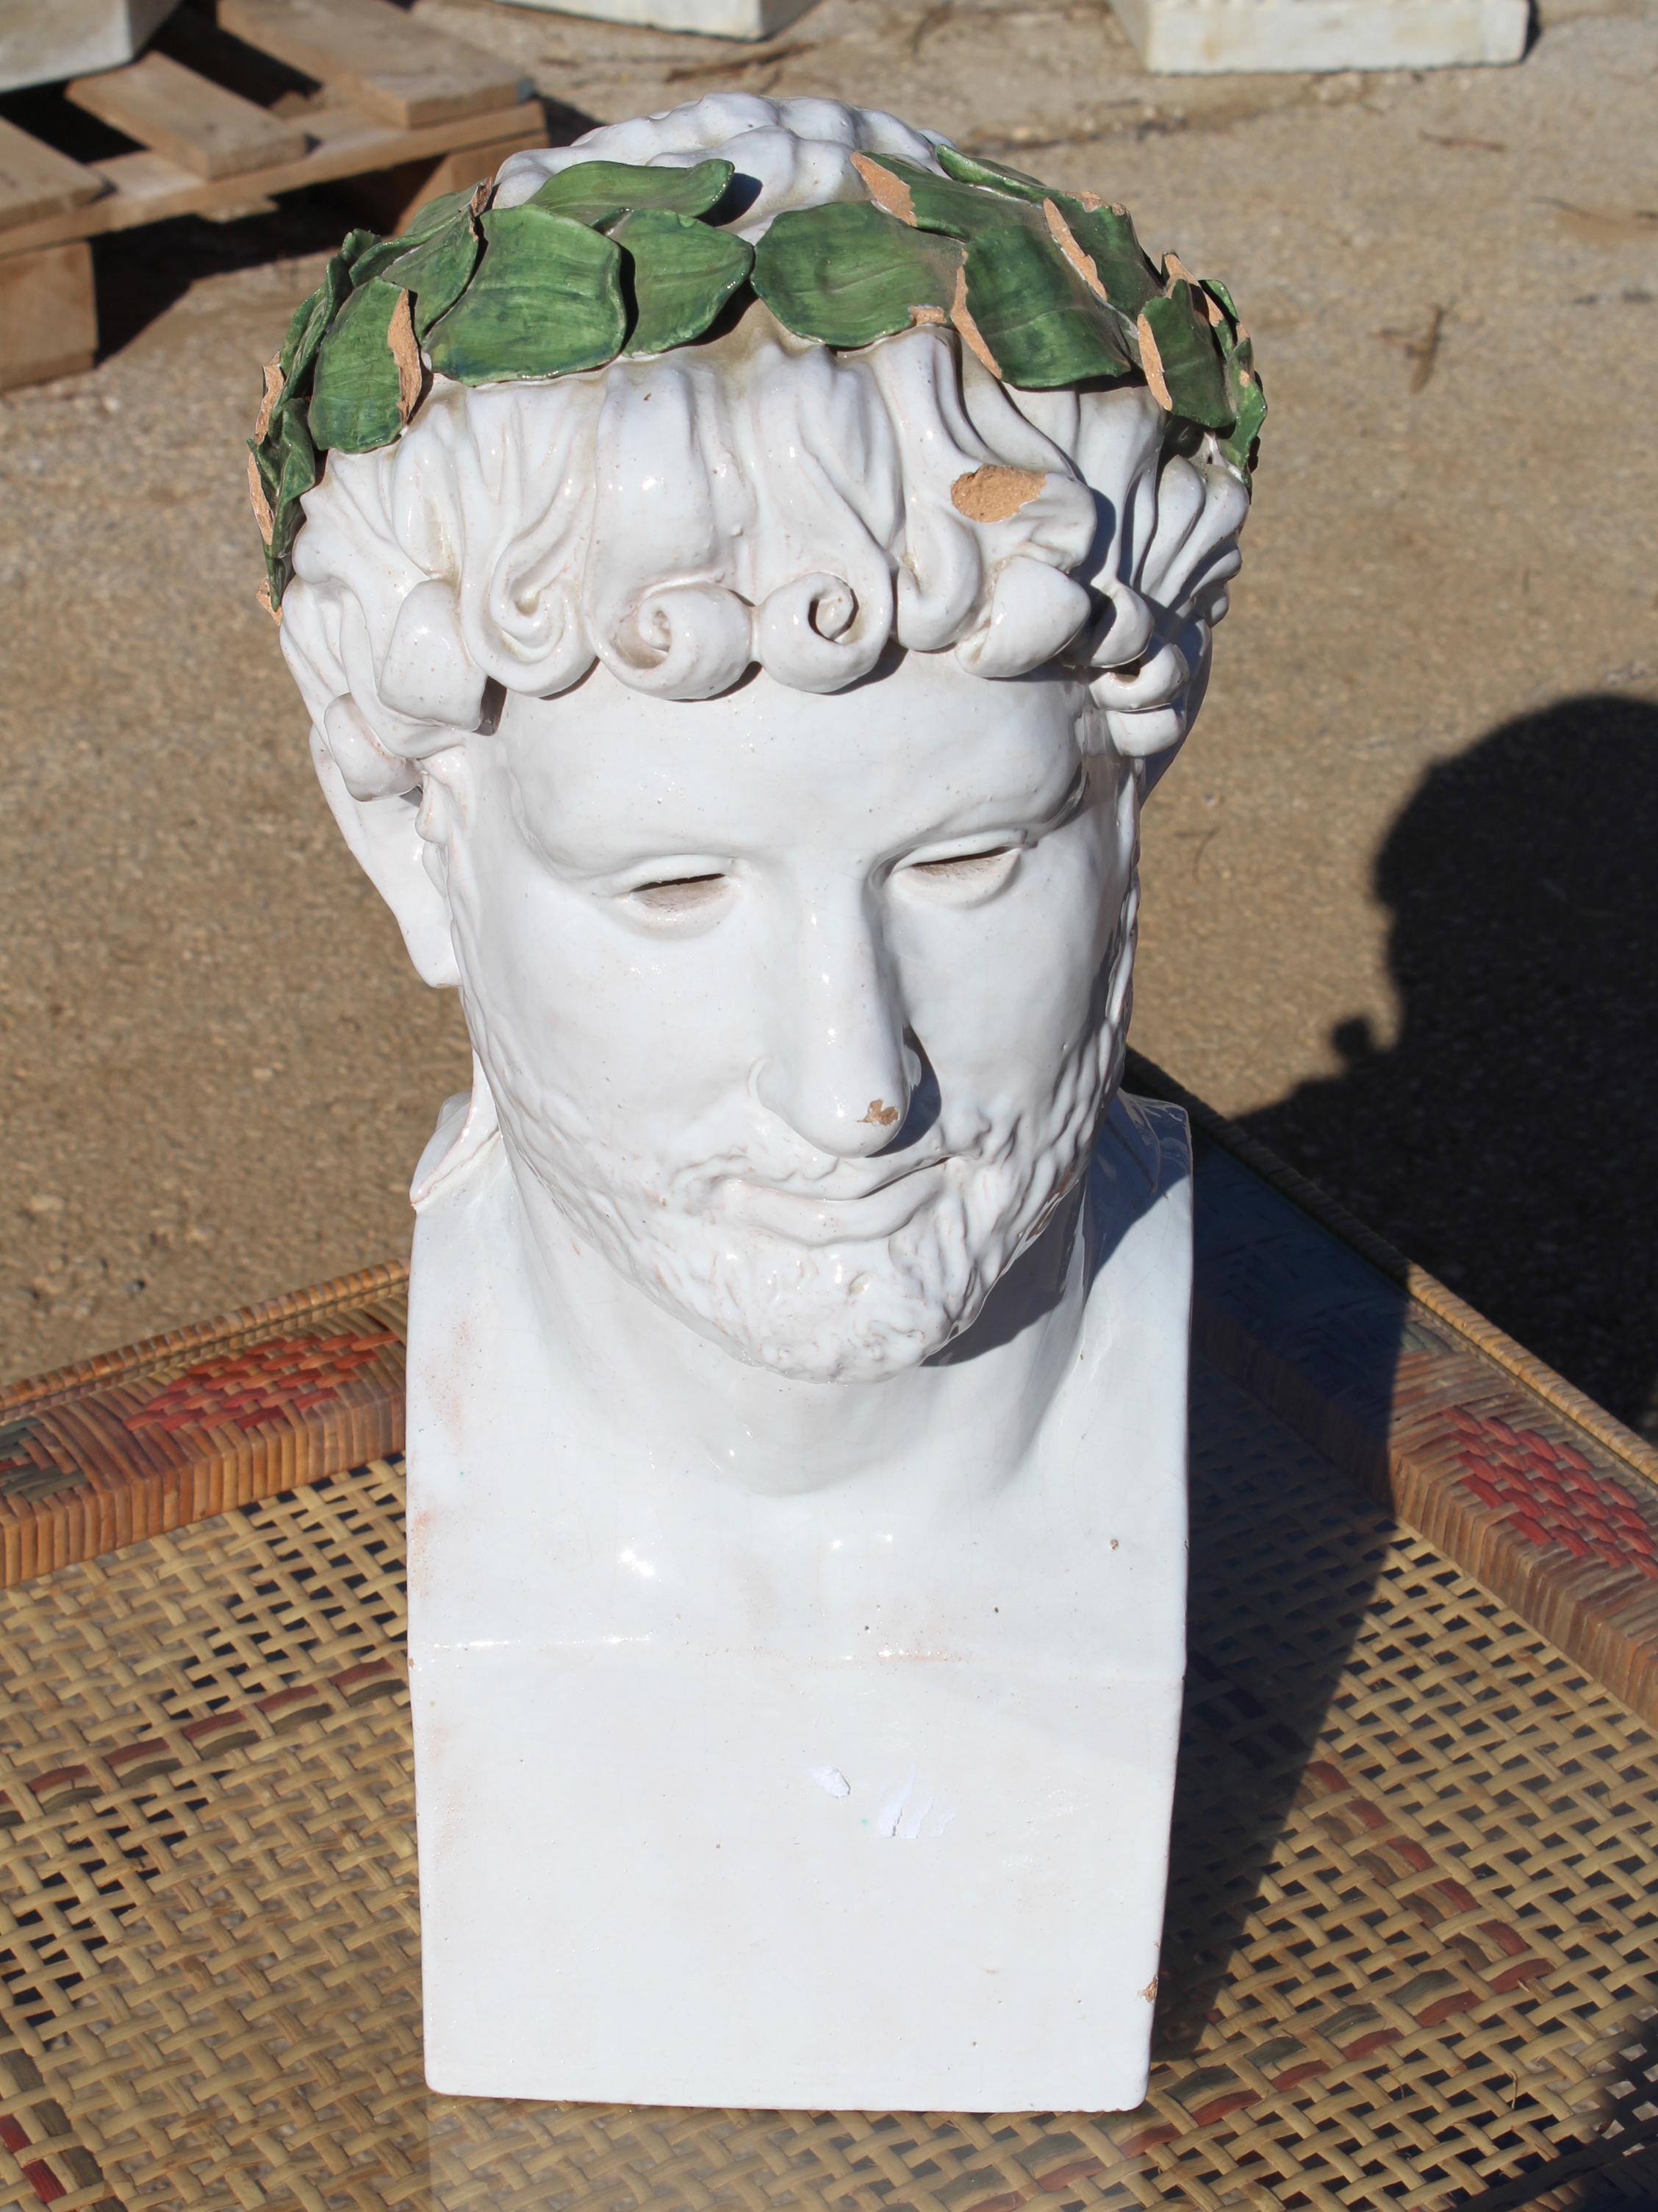 1980s Spanish white glazed terracotta bust of Roman emperor Adrian, crowned with a green laurel leaf wreath.

   